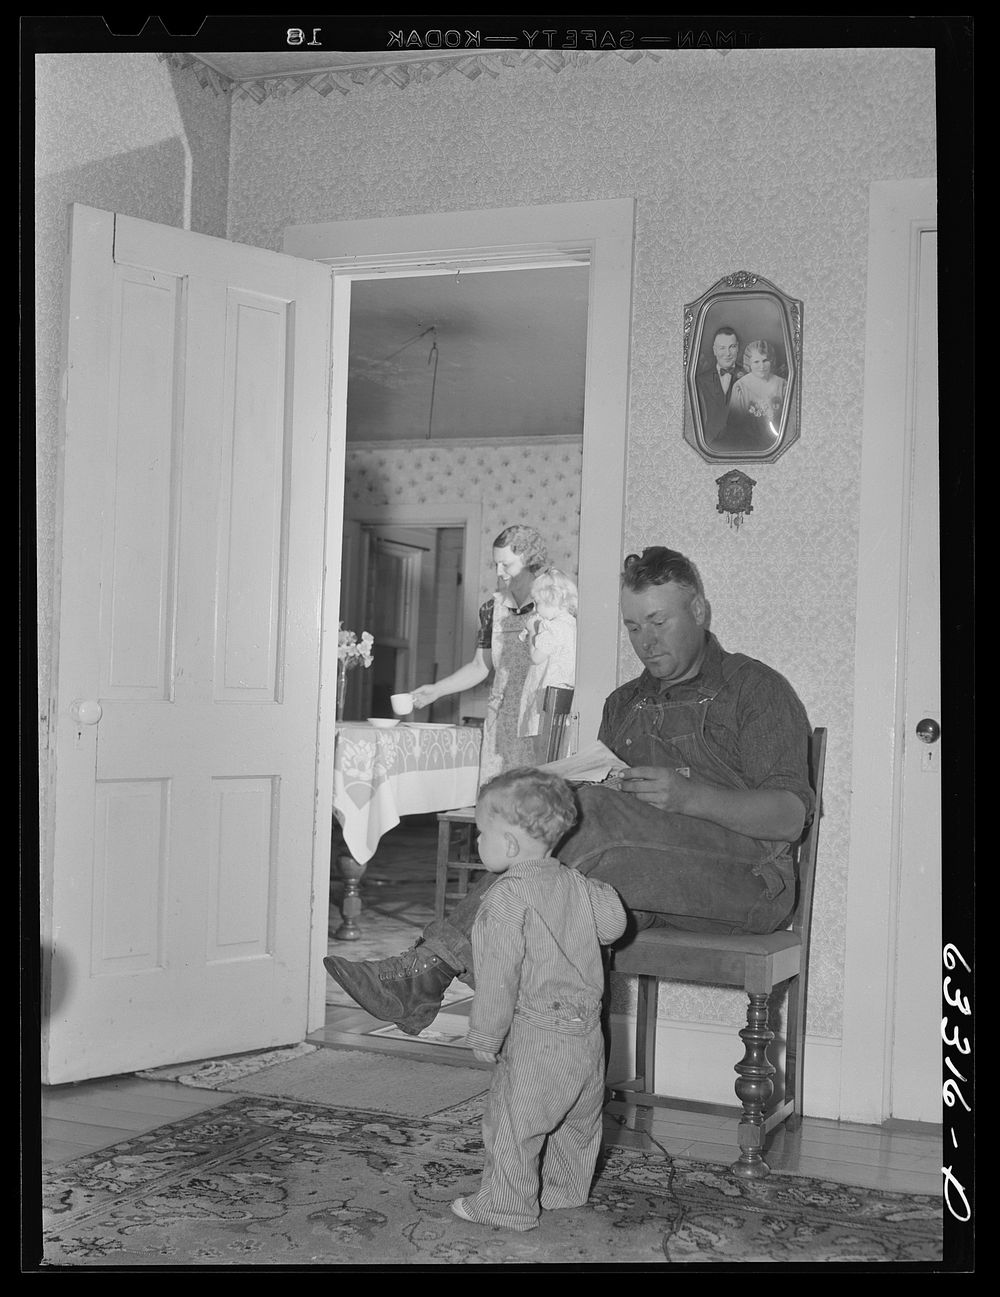 Olaf Ryskedahl and his family. Tenant purchase borrower. Freeborn County, Minnesota. Sourced from the Library of Congress.